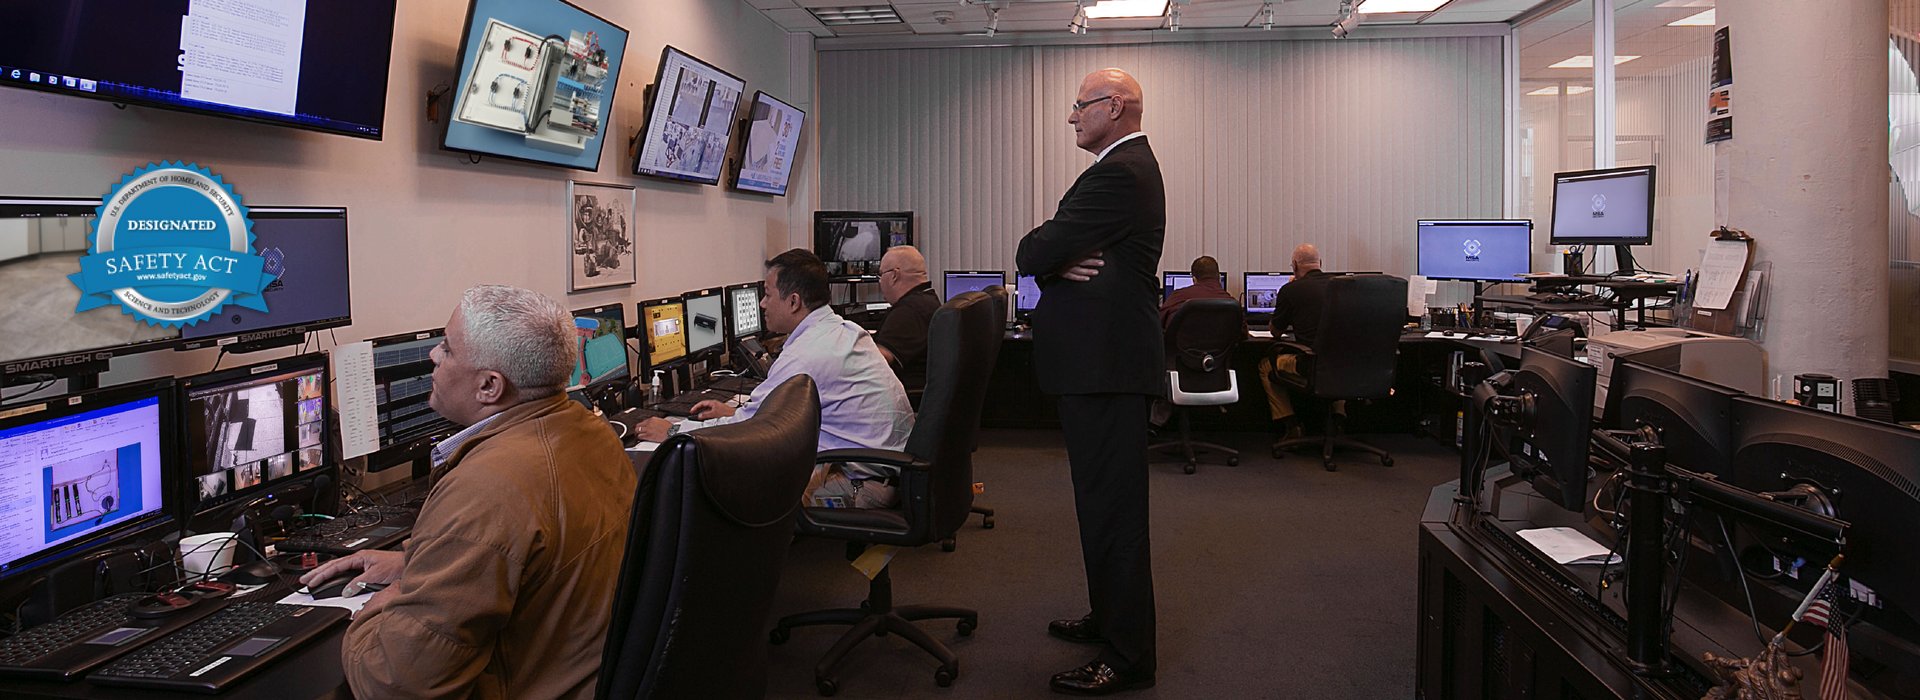 analyst team looking at SmartTech scans in the emergency operations center